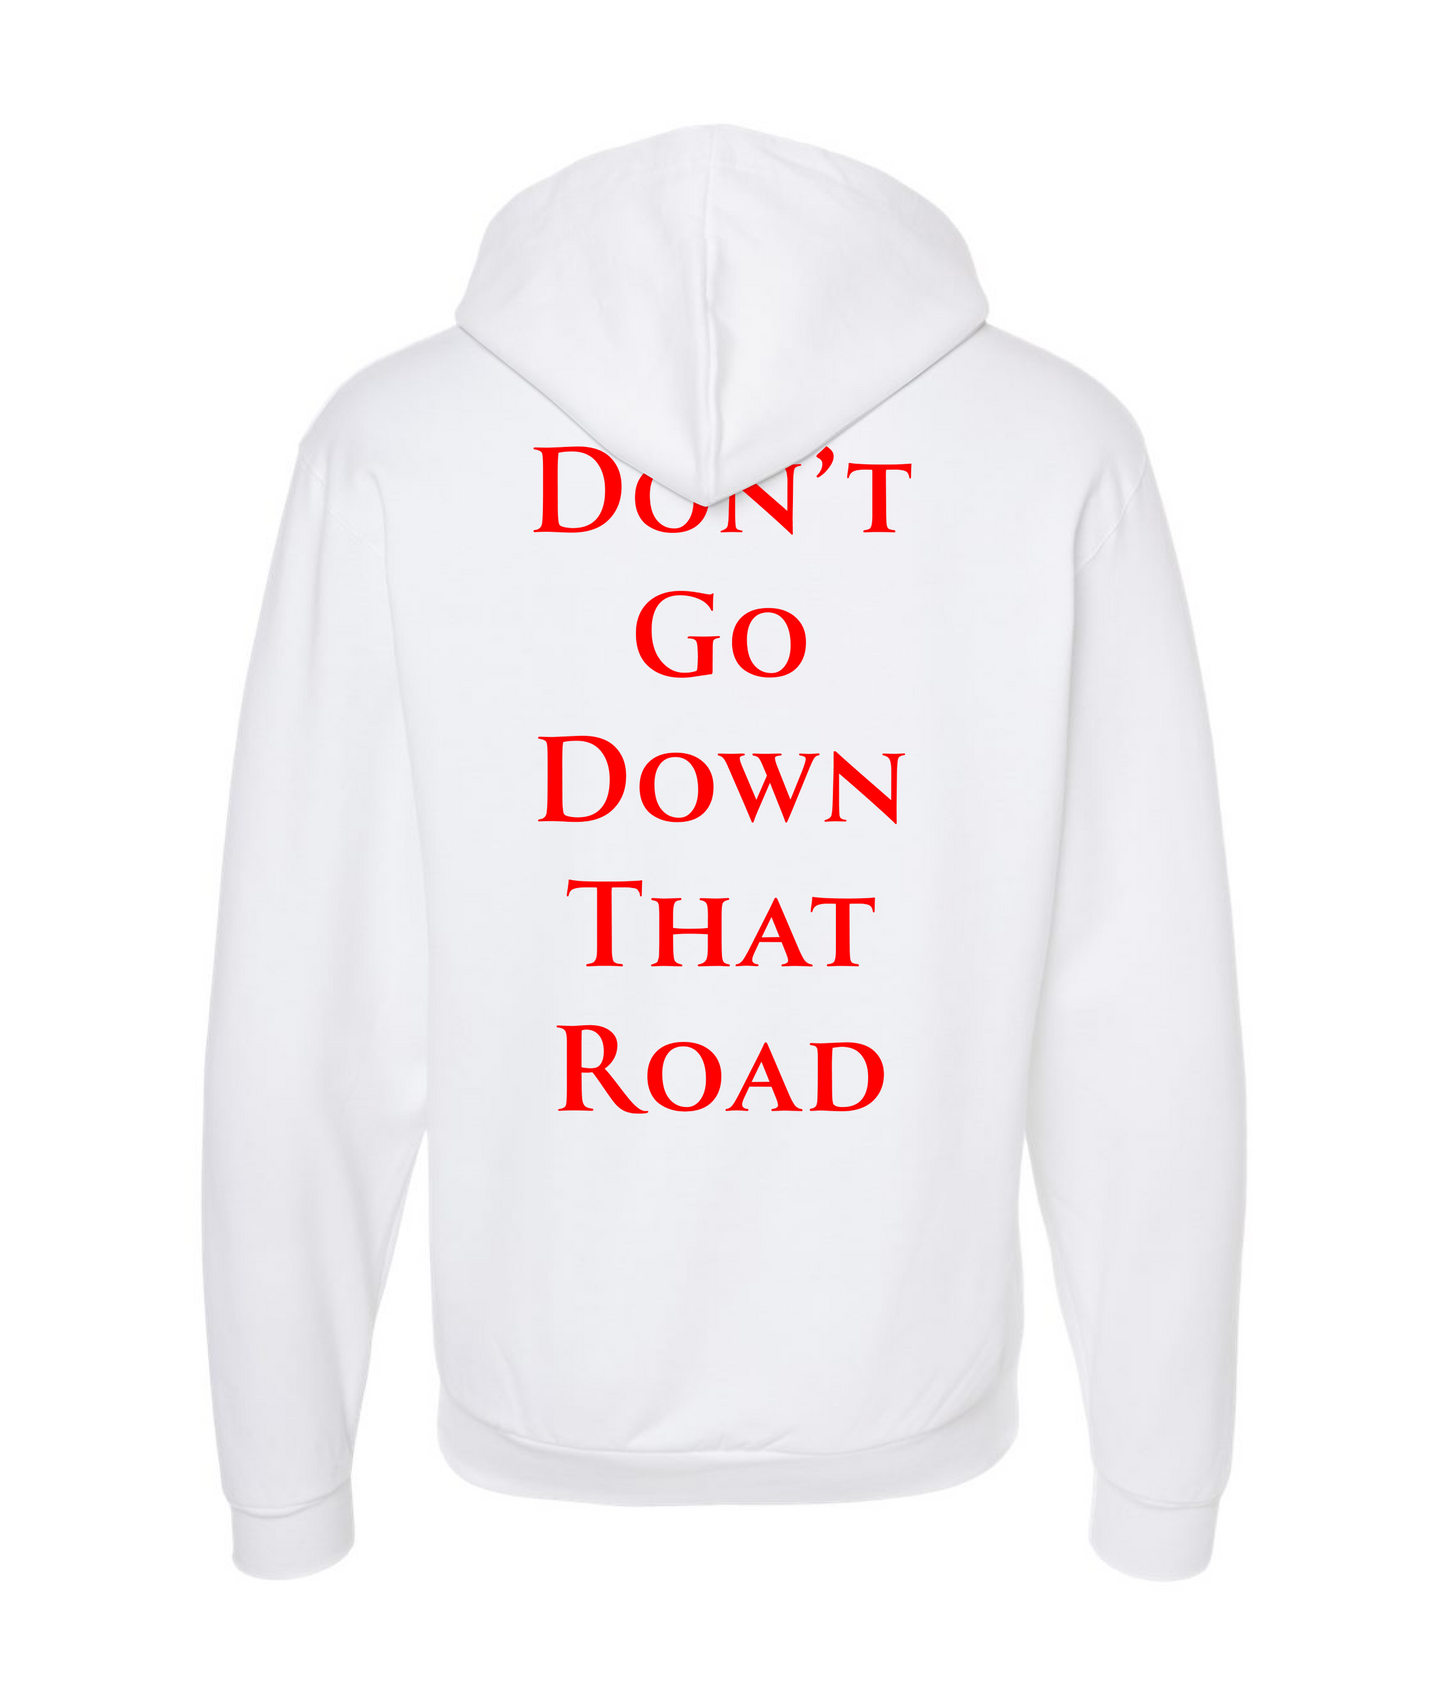 Seglock - DON'T GO DOWN THAT ROAD - White Zip Up Hoodie